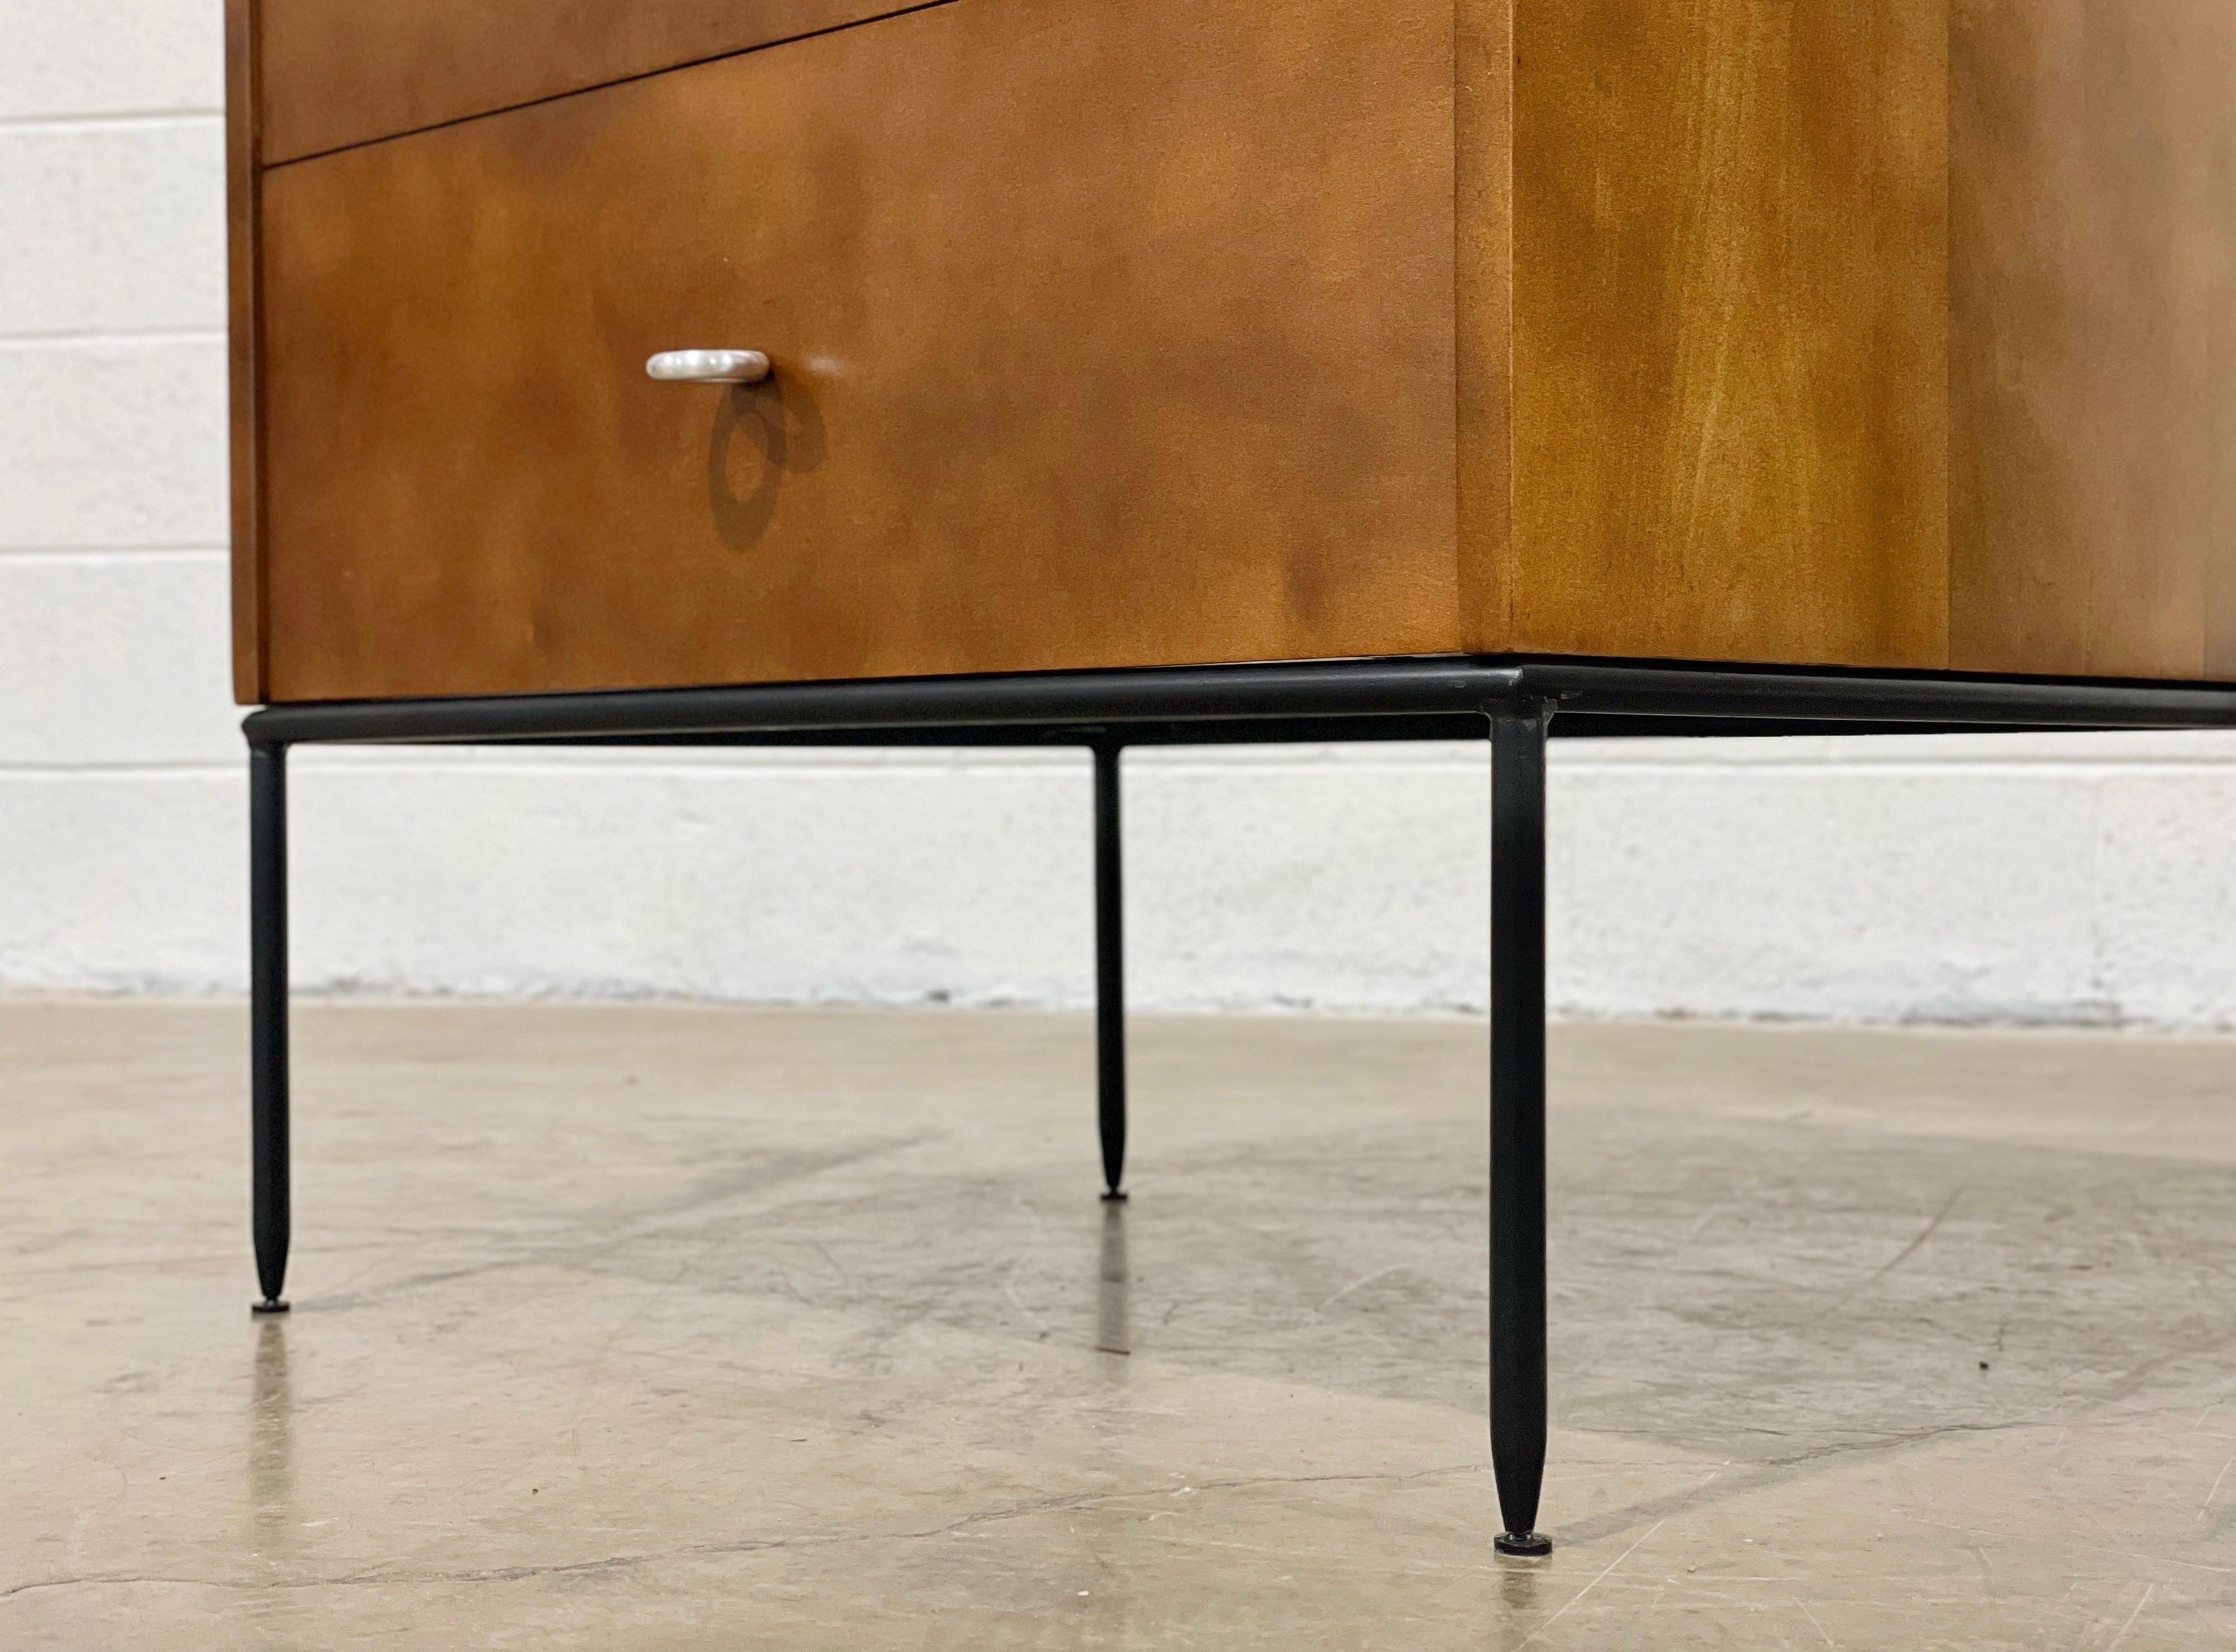 Mid-20th Century Midcentury Paul McCobb Nightstands #1503, Two Drawer on Iron Bases O-Ring Pulls